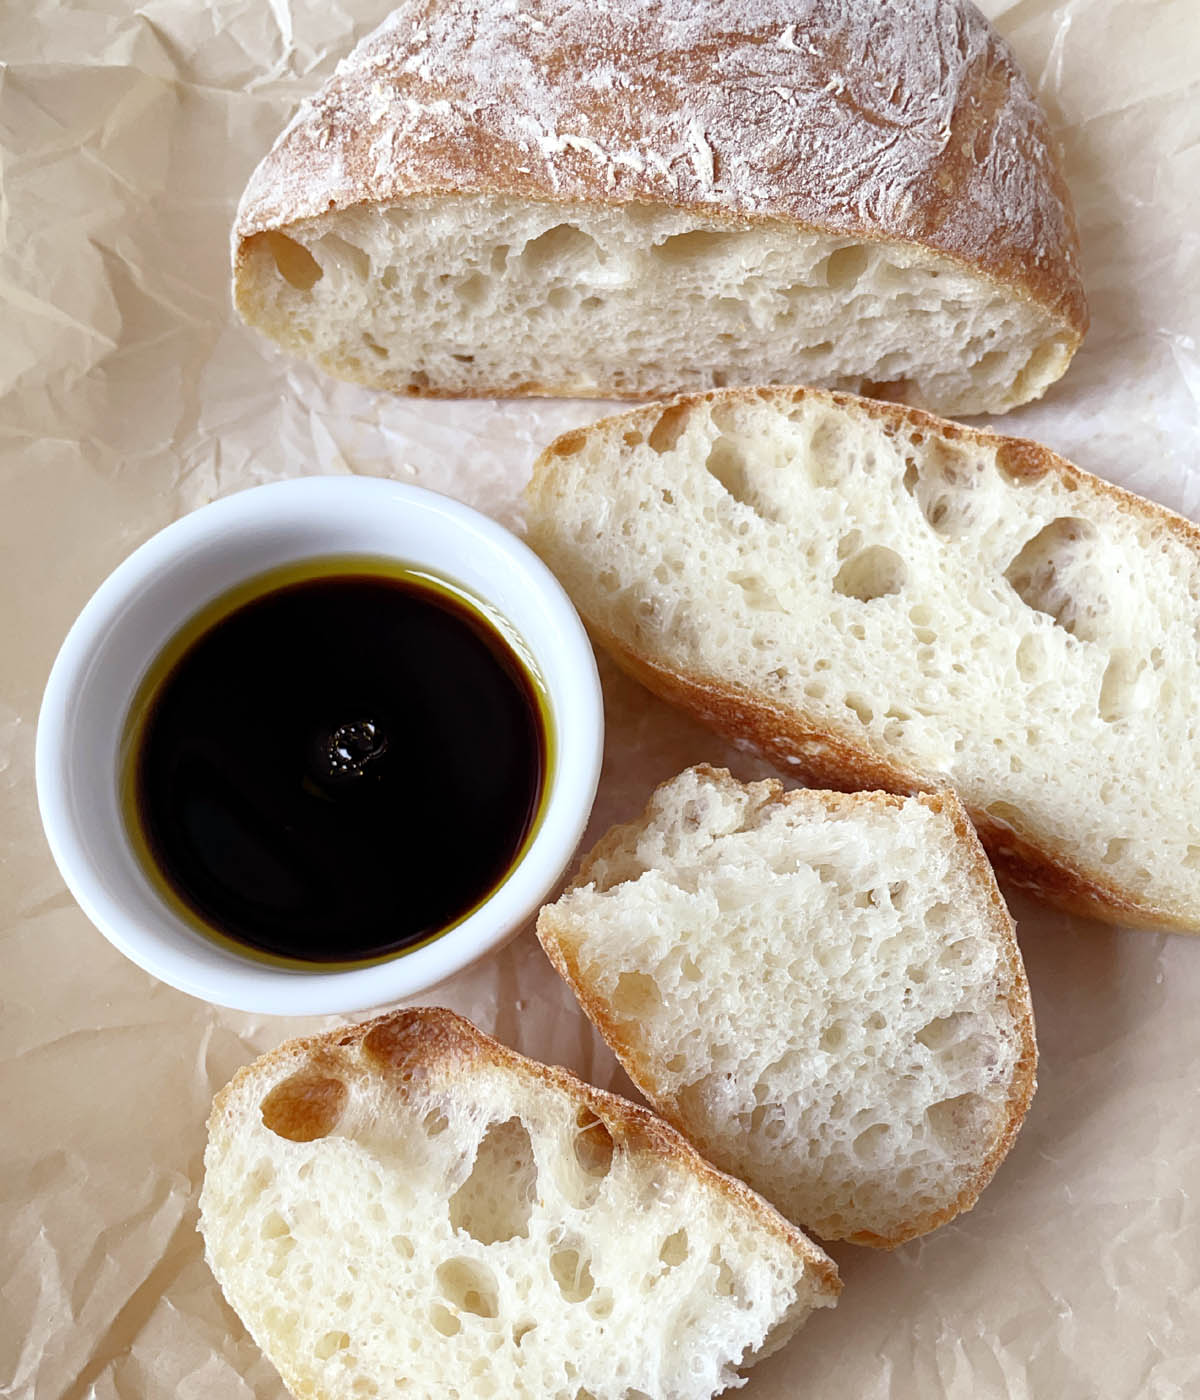 Slices of baked bread next to a white bowl containing oil and black vinegar.